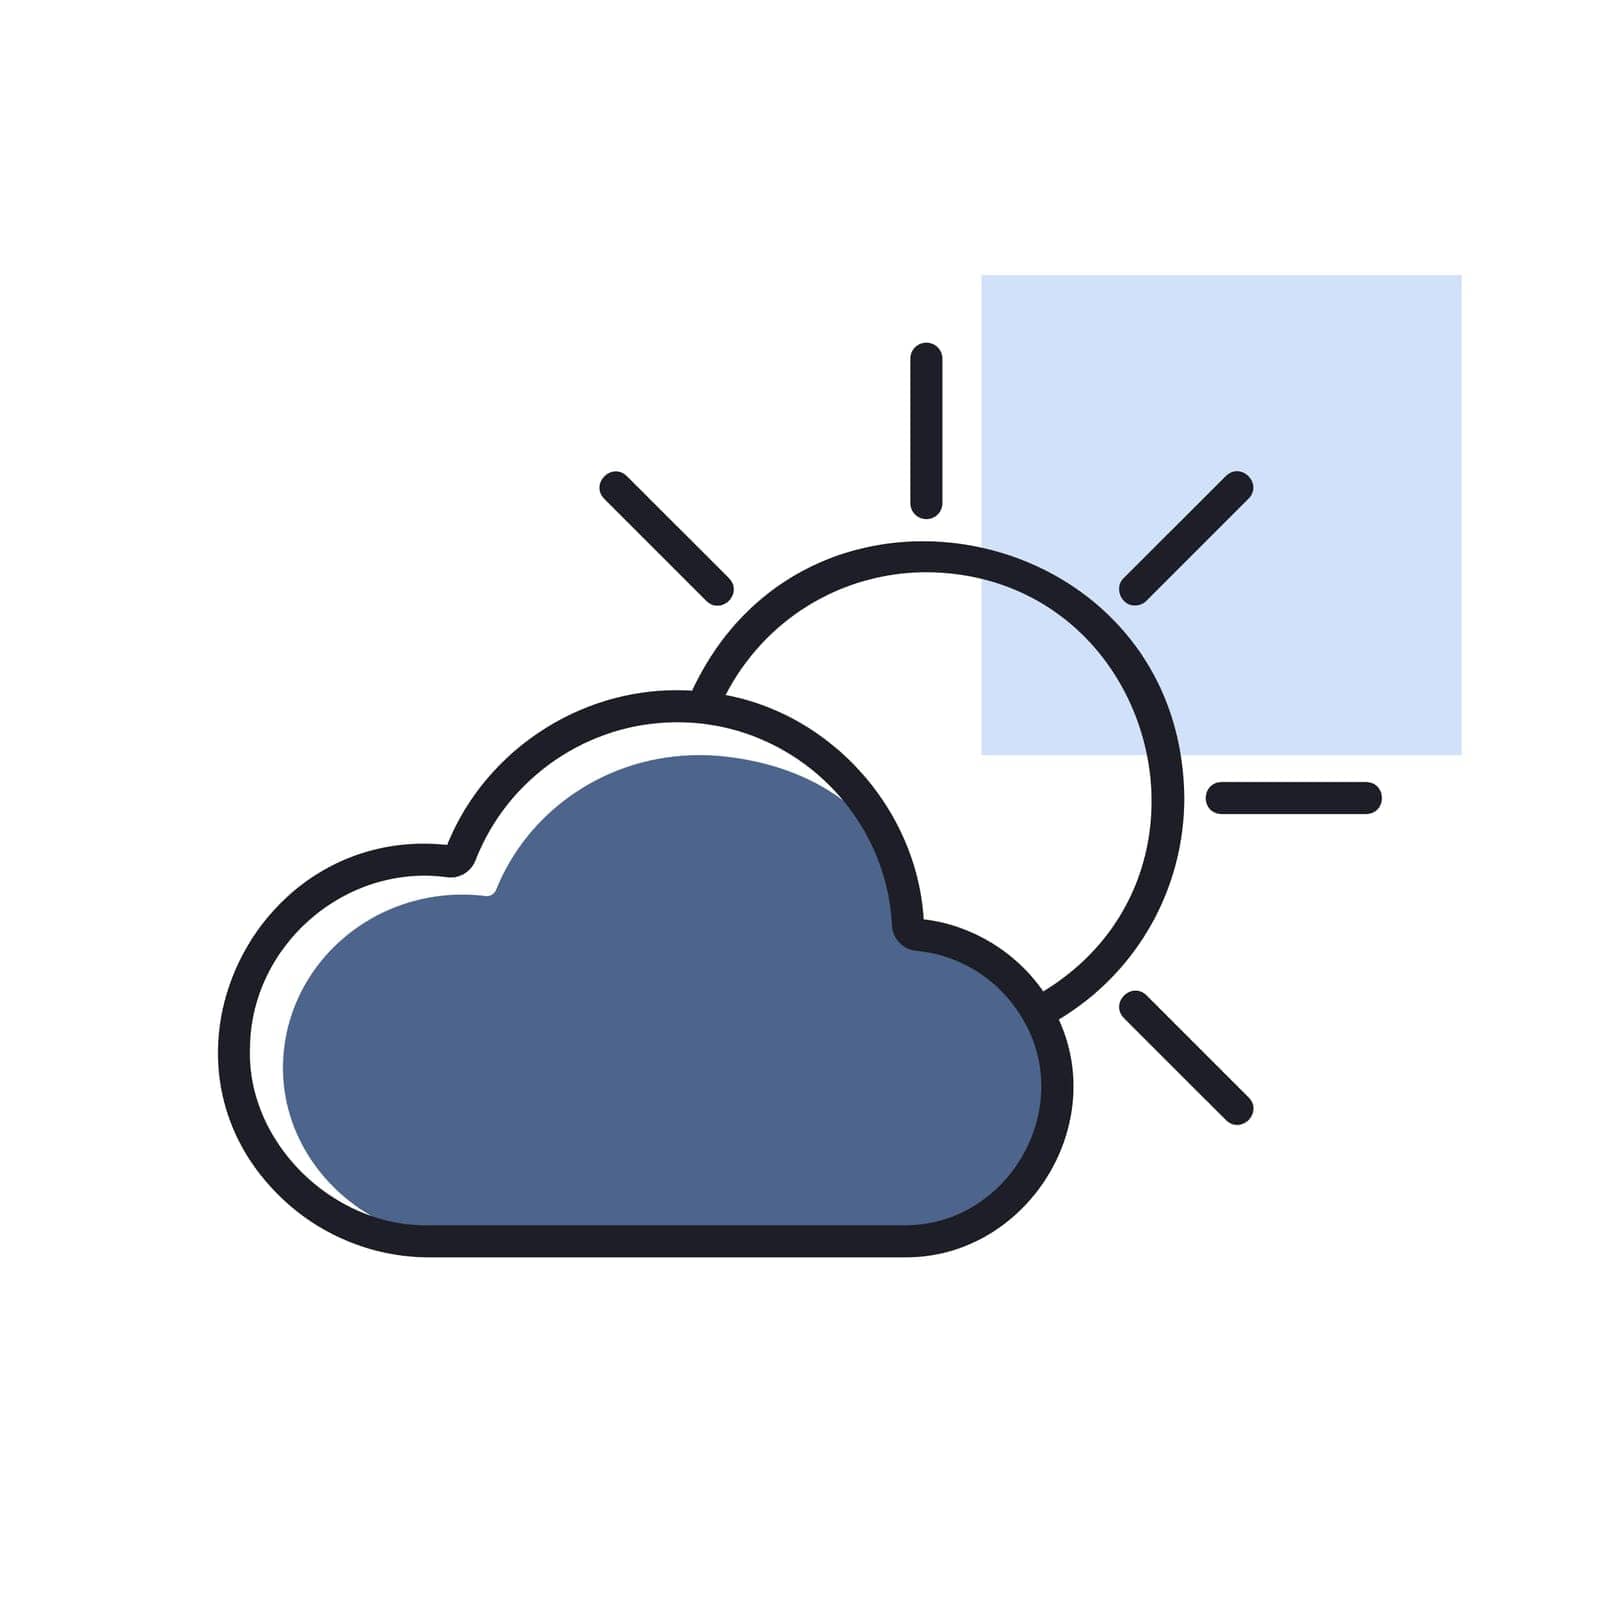 Sun and cloud vector icon. Weather sign by nosik